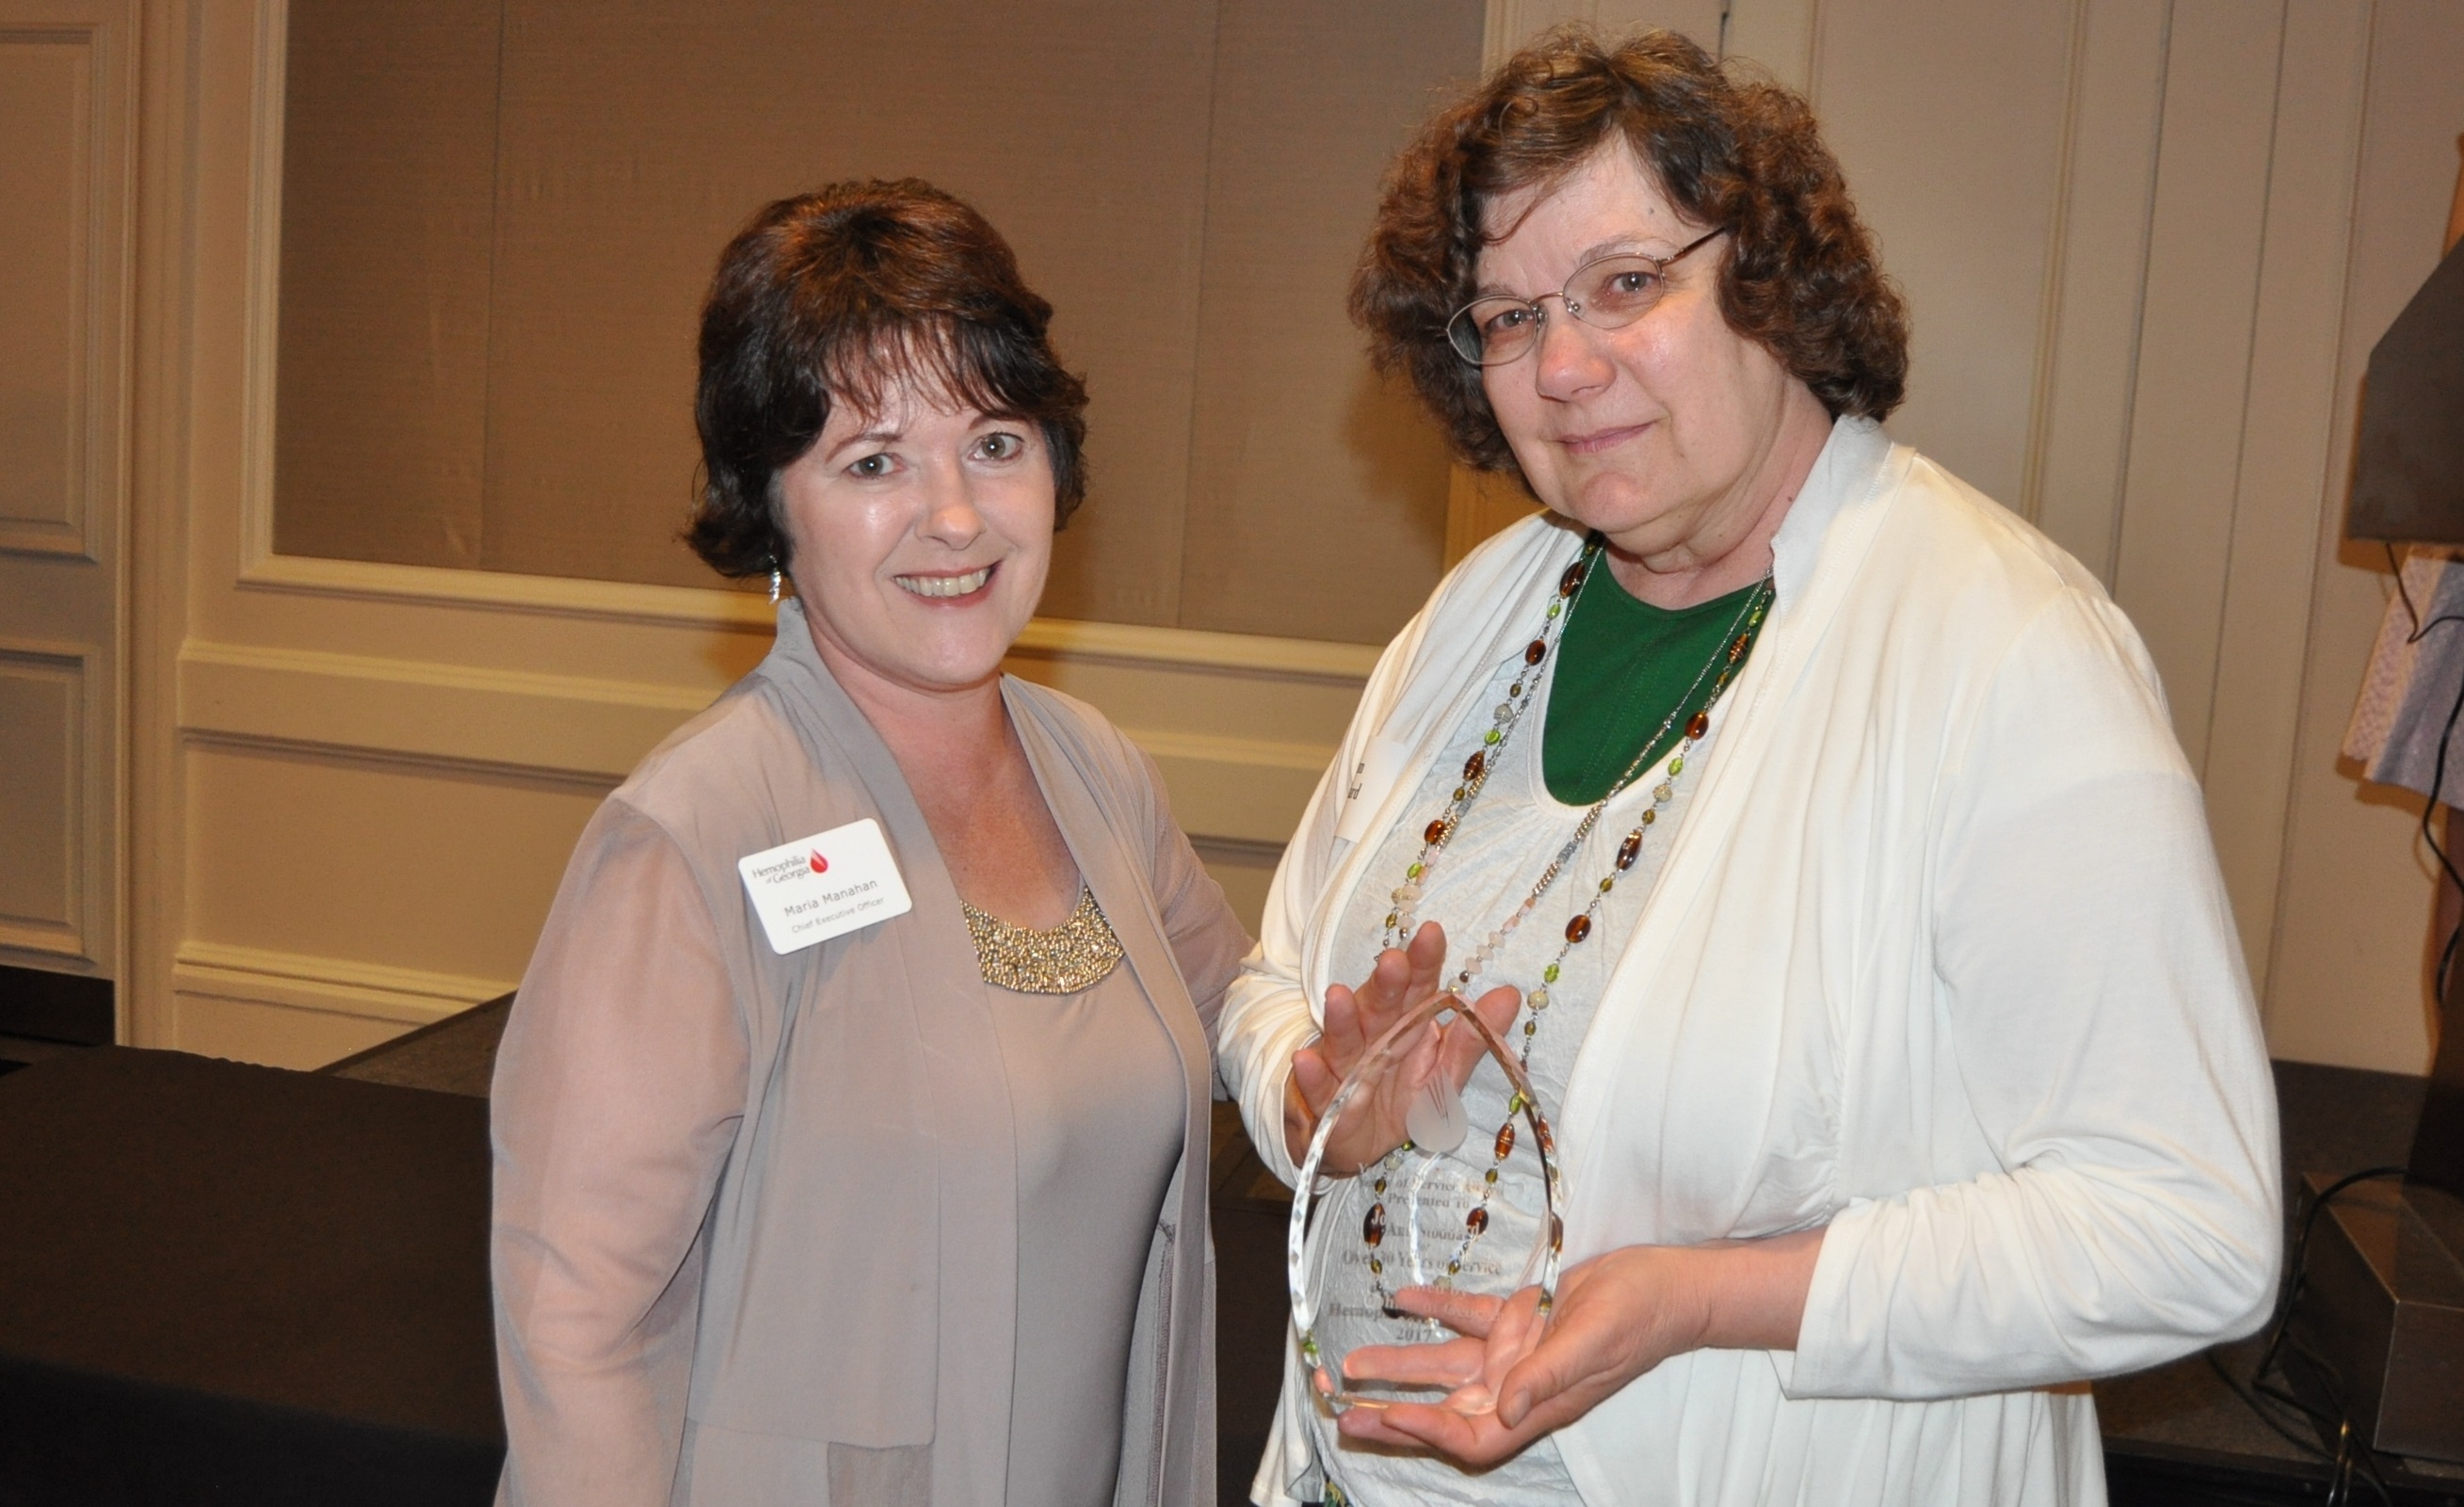 Jo Ann Stoddard was Awarded for Years of Service